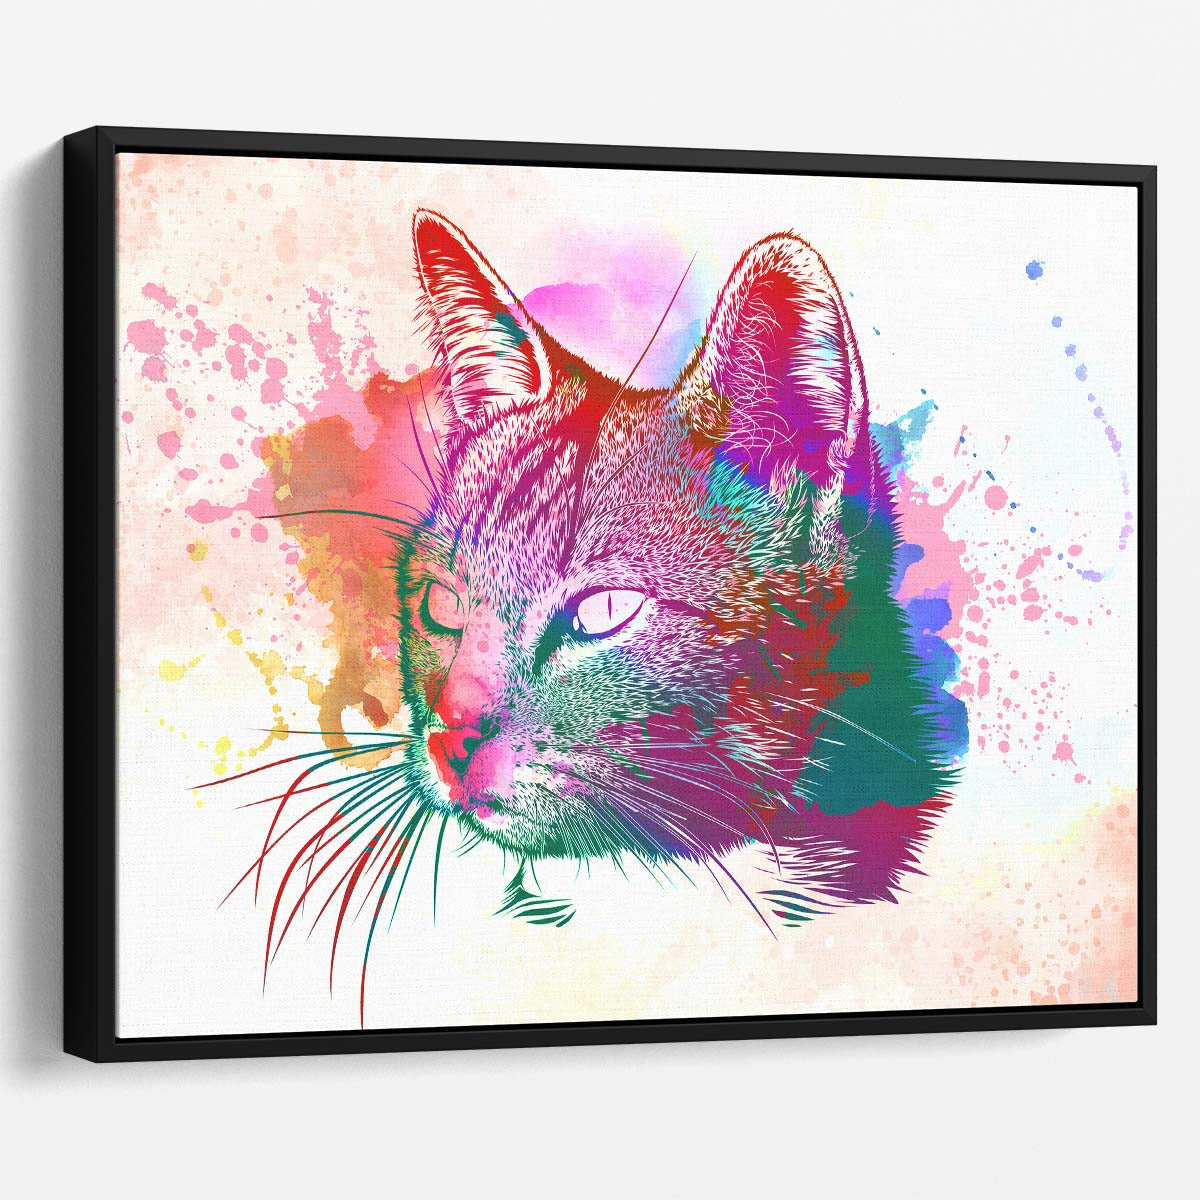 Cat Watercolor Painting Wall Art by Luxuriance Designs. Made in USA.